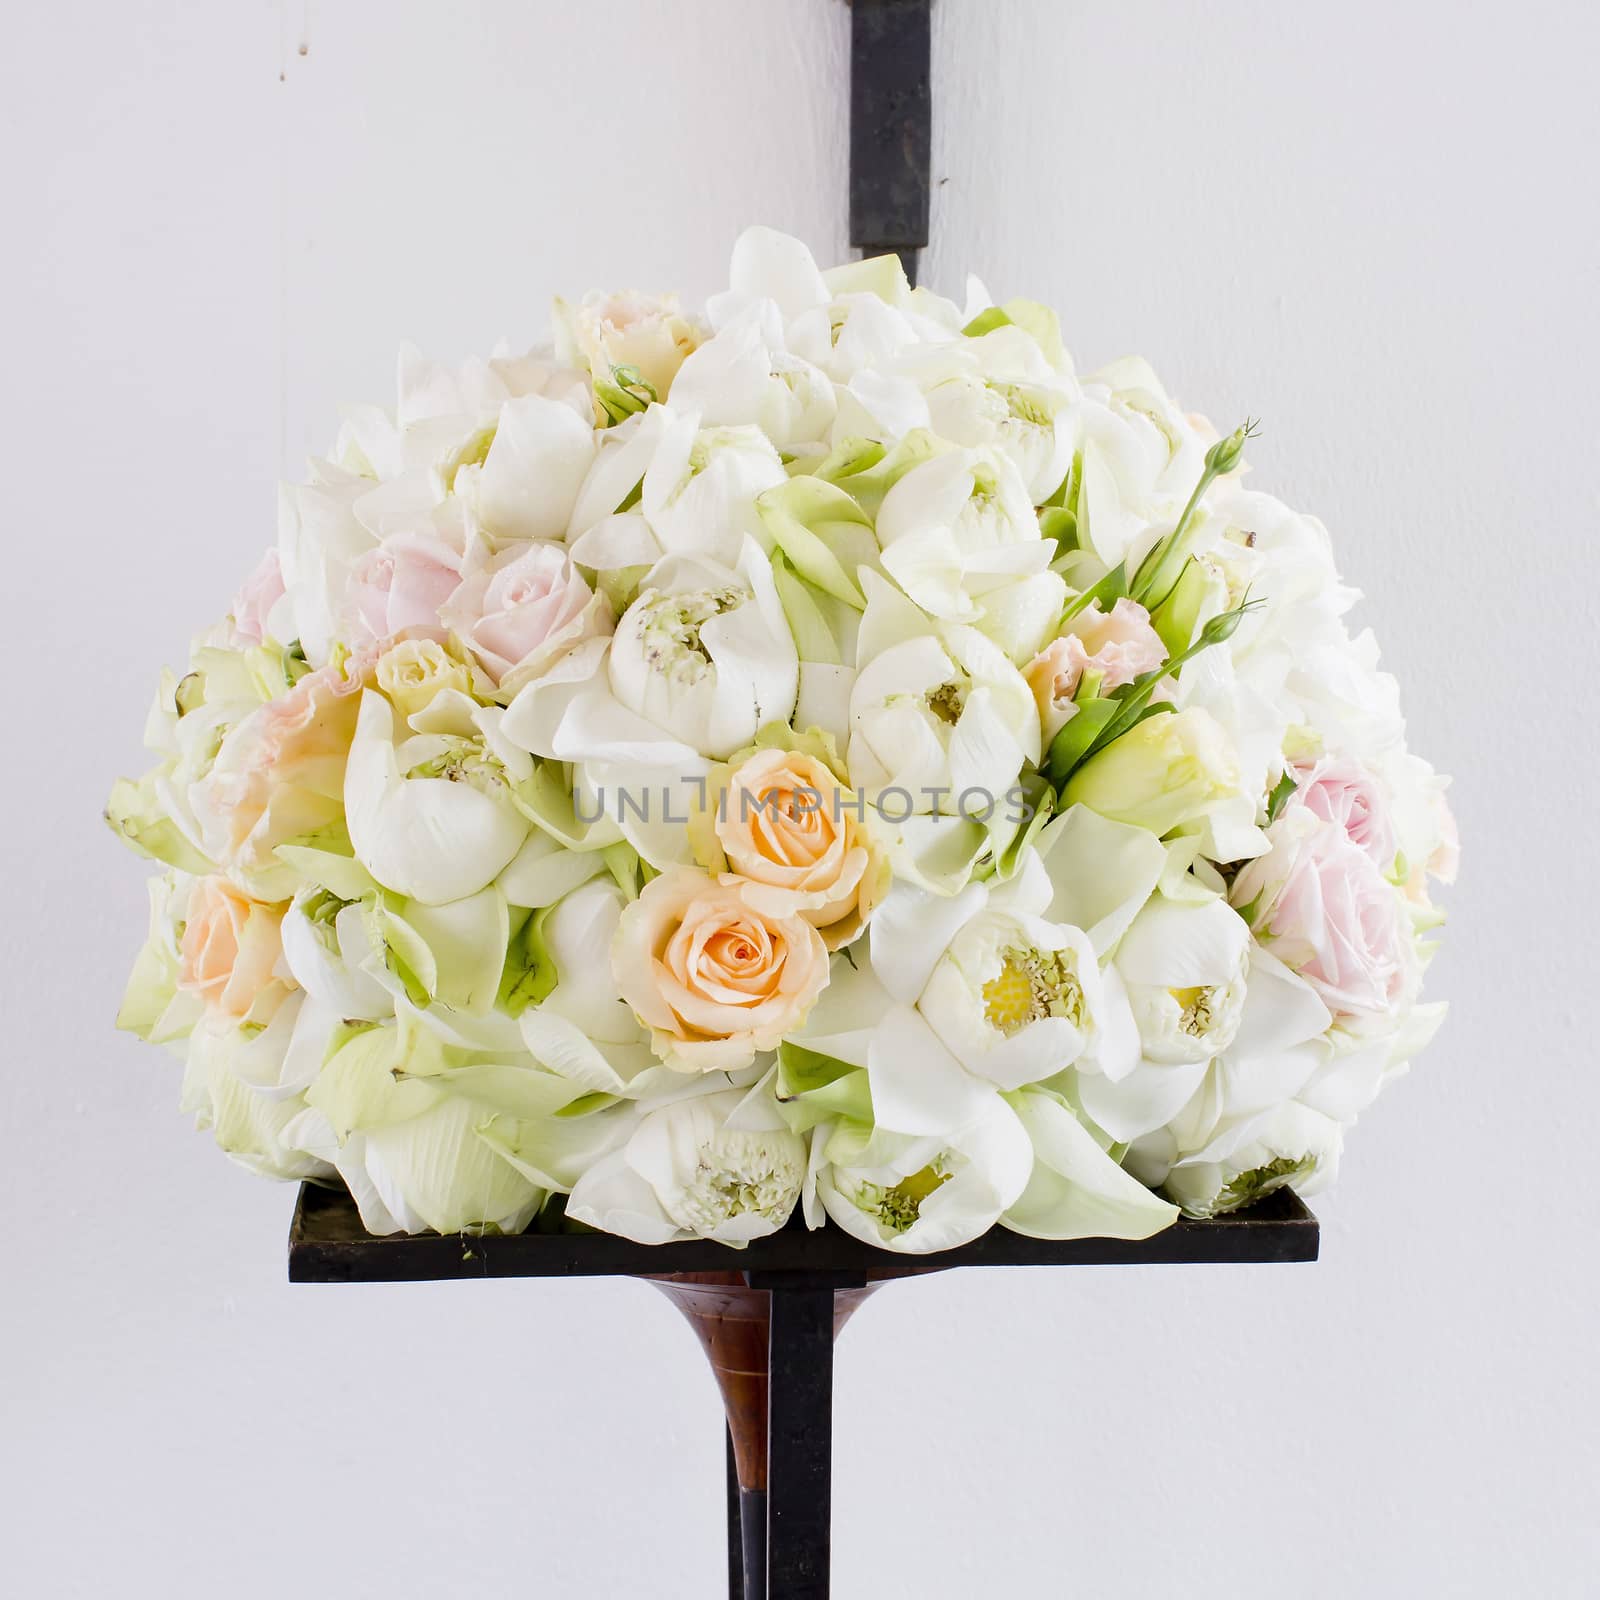 flowers bouquet arrange for decoration in wedding ceremony by art9858